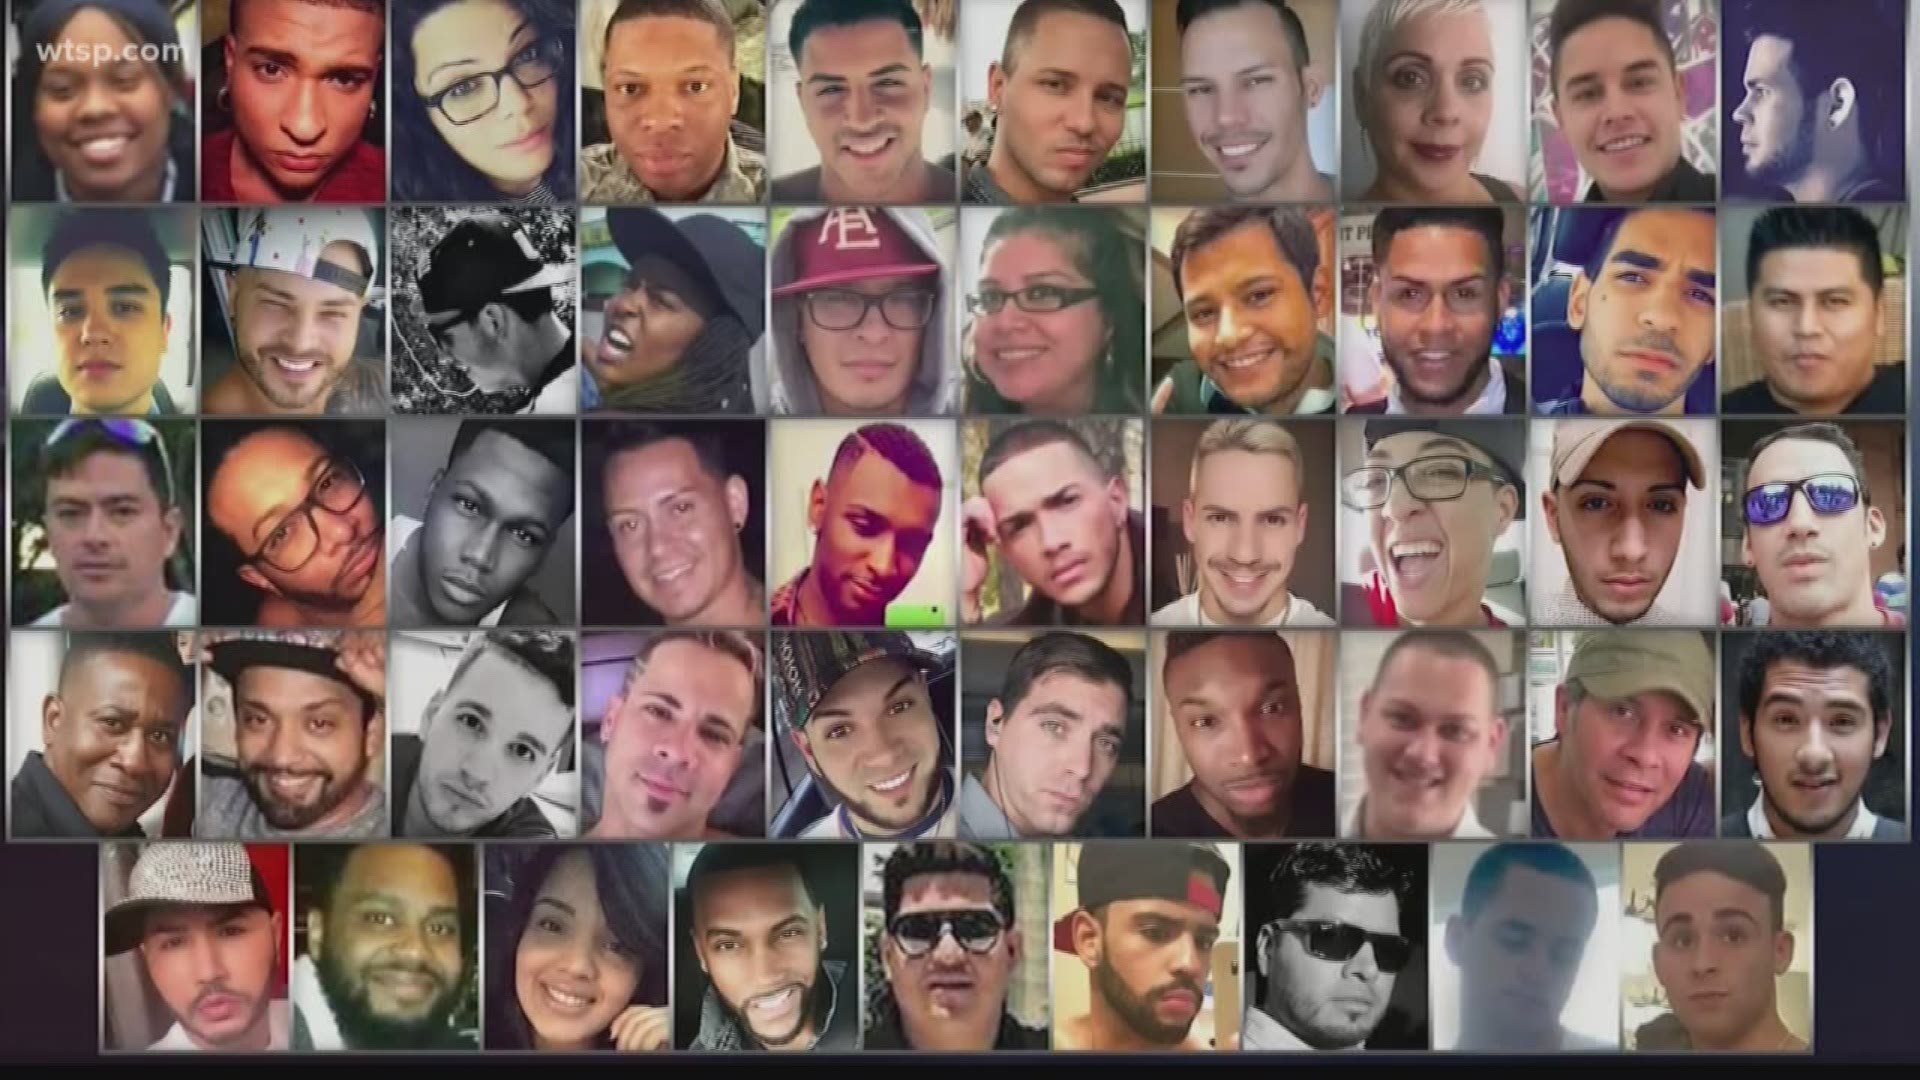 Several ceremonies are planned to mourn the 49 people killed in the Pulse nightclub shooting in Orlando. https://on.wtsp.com/2Izo8FV